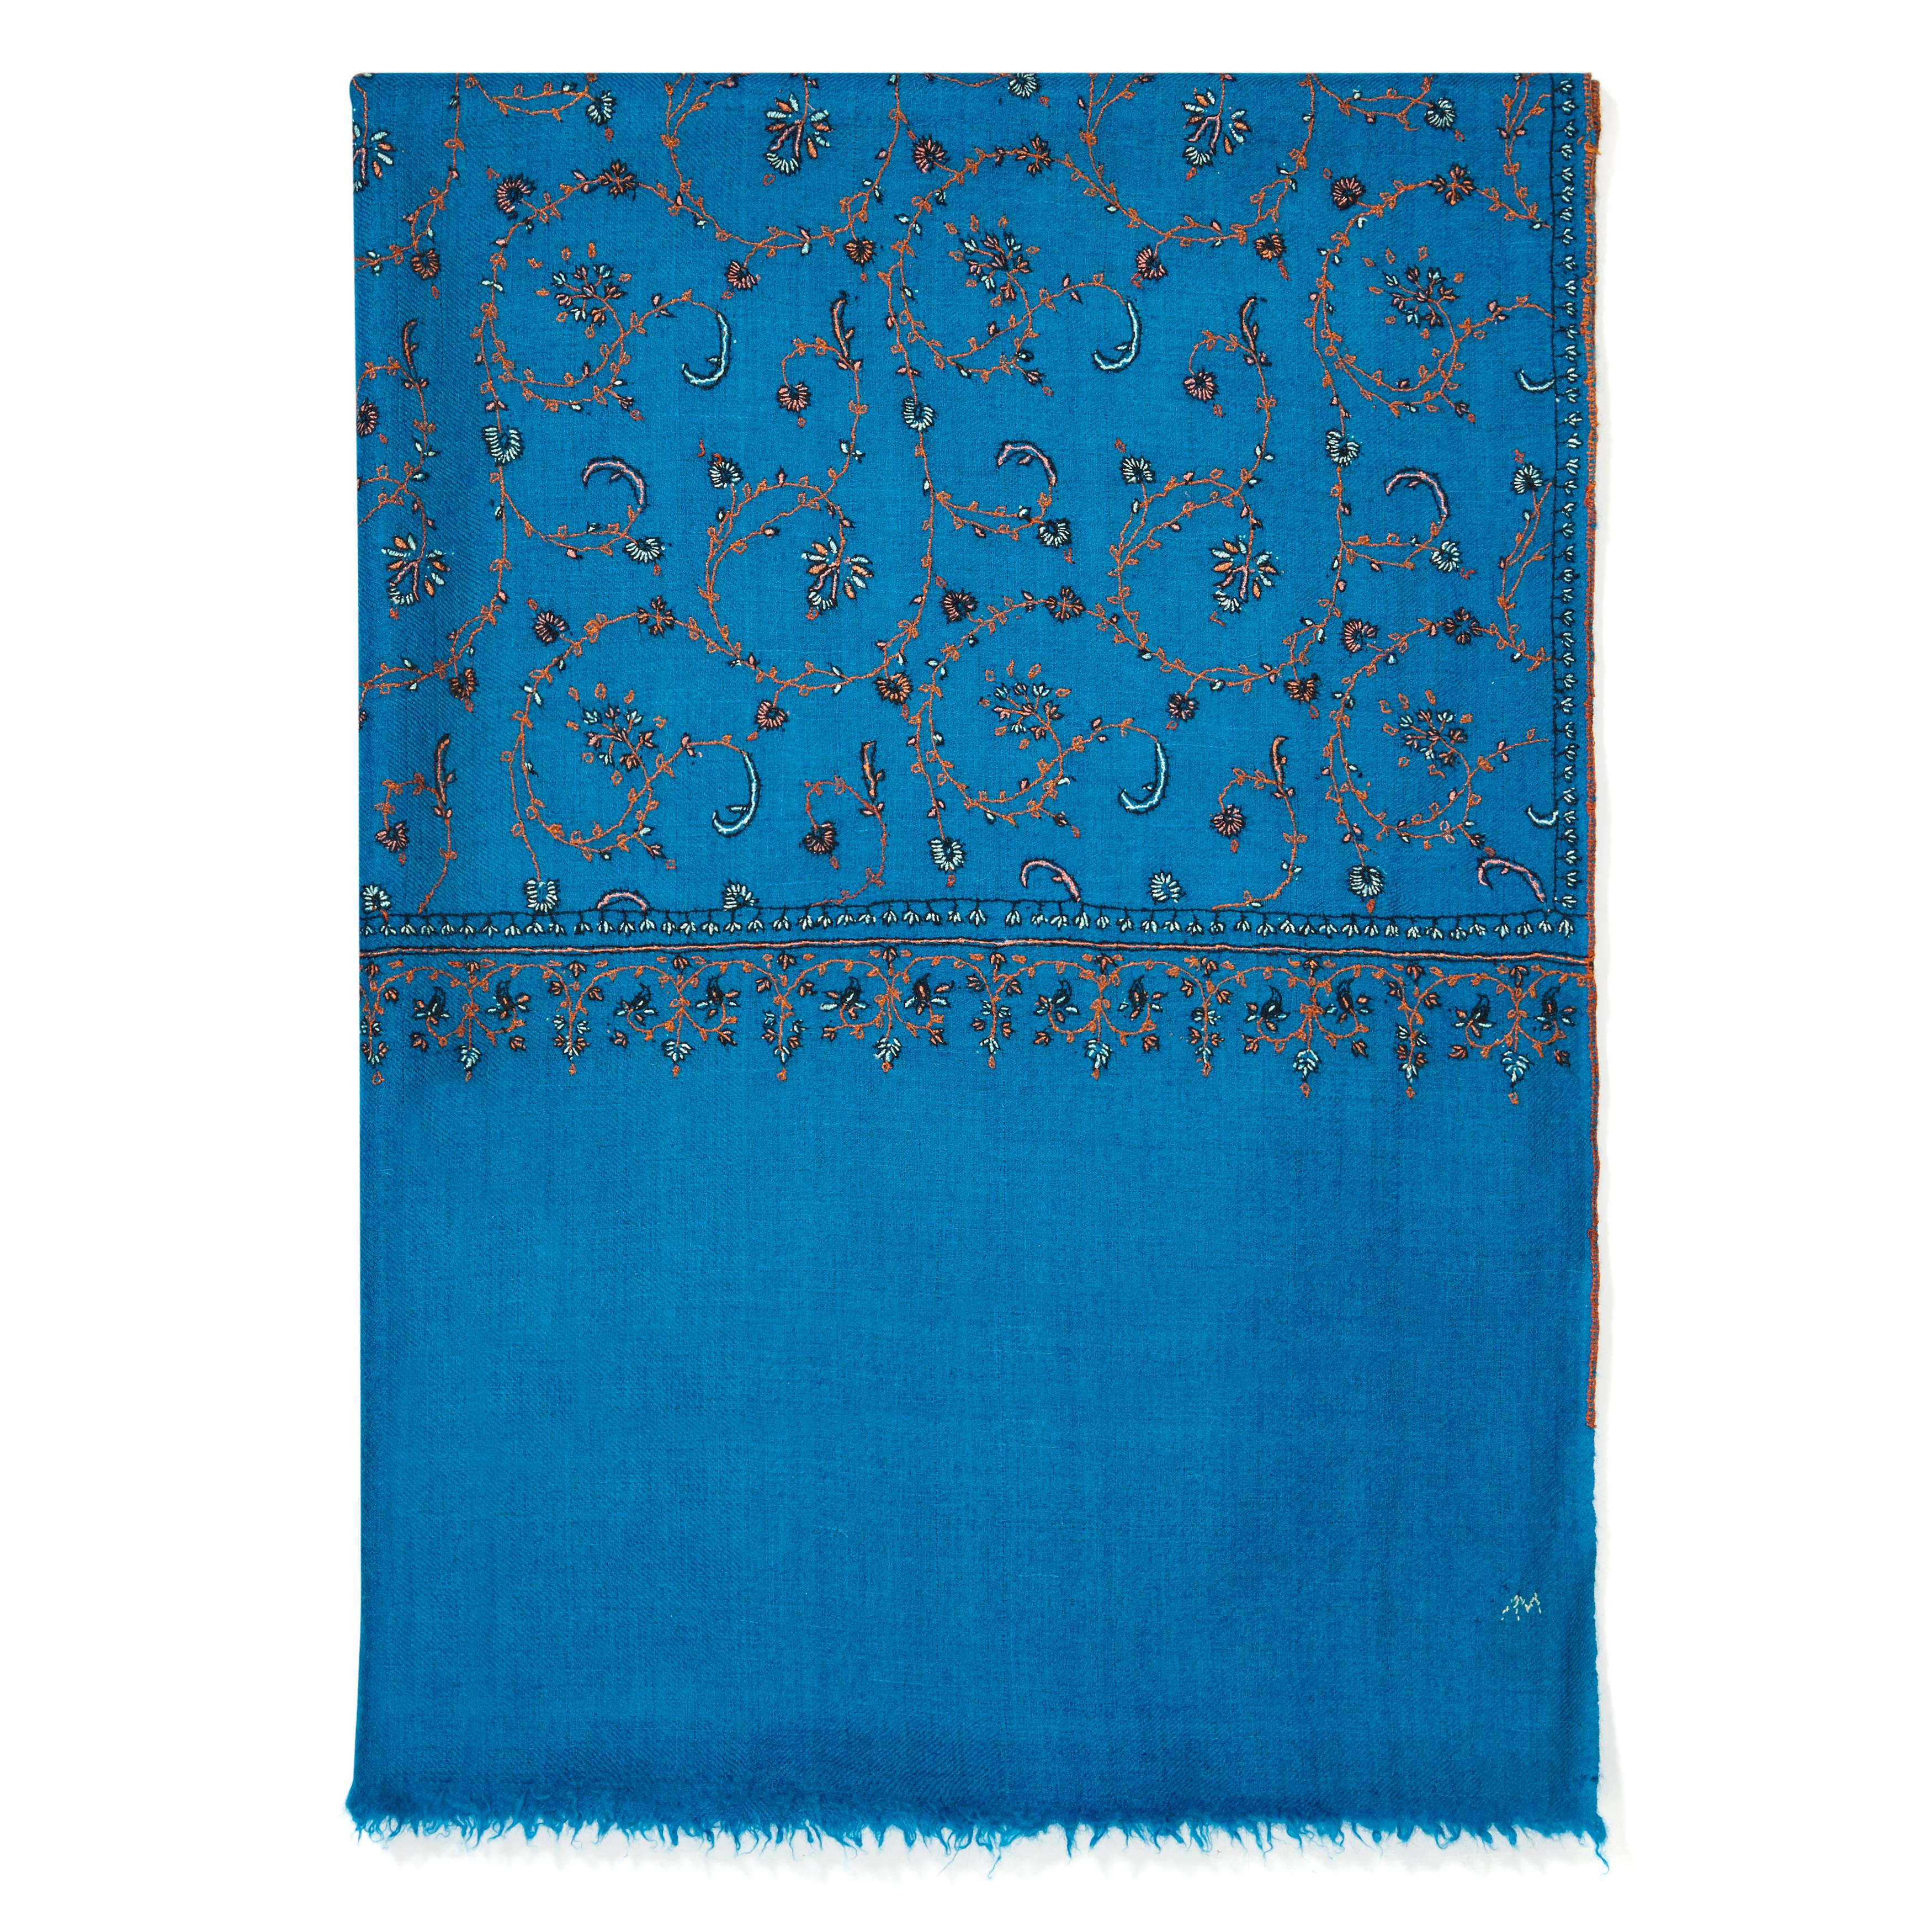 Limited Edition Hand Embroidered Cashmere Shawl in Blue Made in Kashmir - Gift im Zustand „Neu“ in London, GB